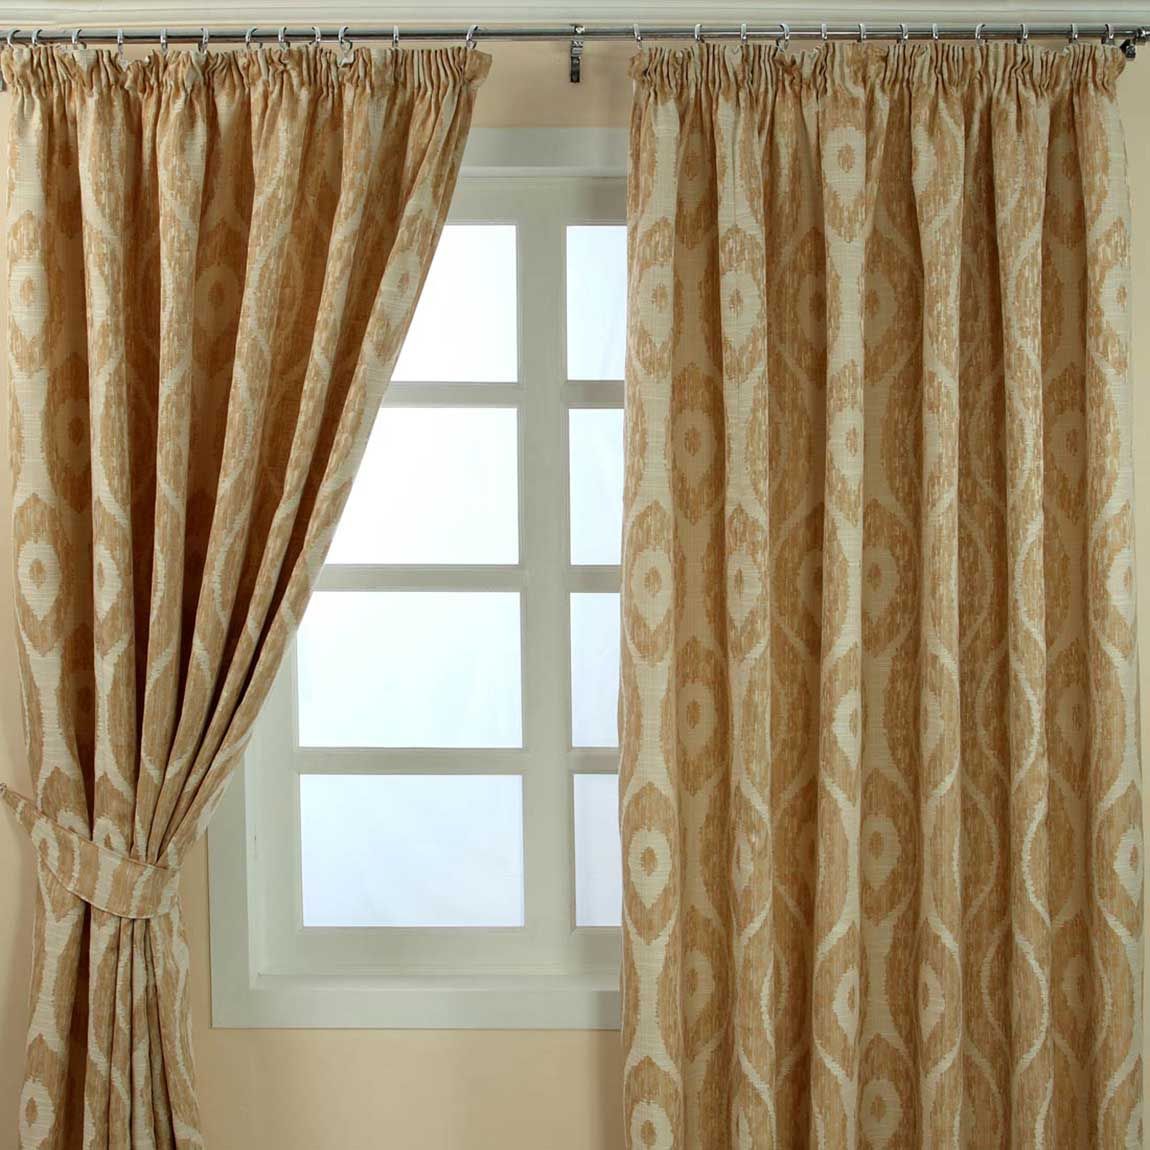 ZIG ZAG CHEVRON BROWN BEIGE CREAM FULLY LINED RING TOP CURTAINS *7 SIZES* 